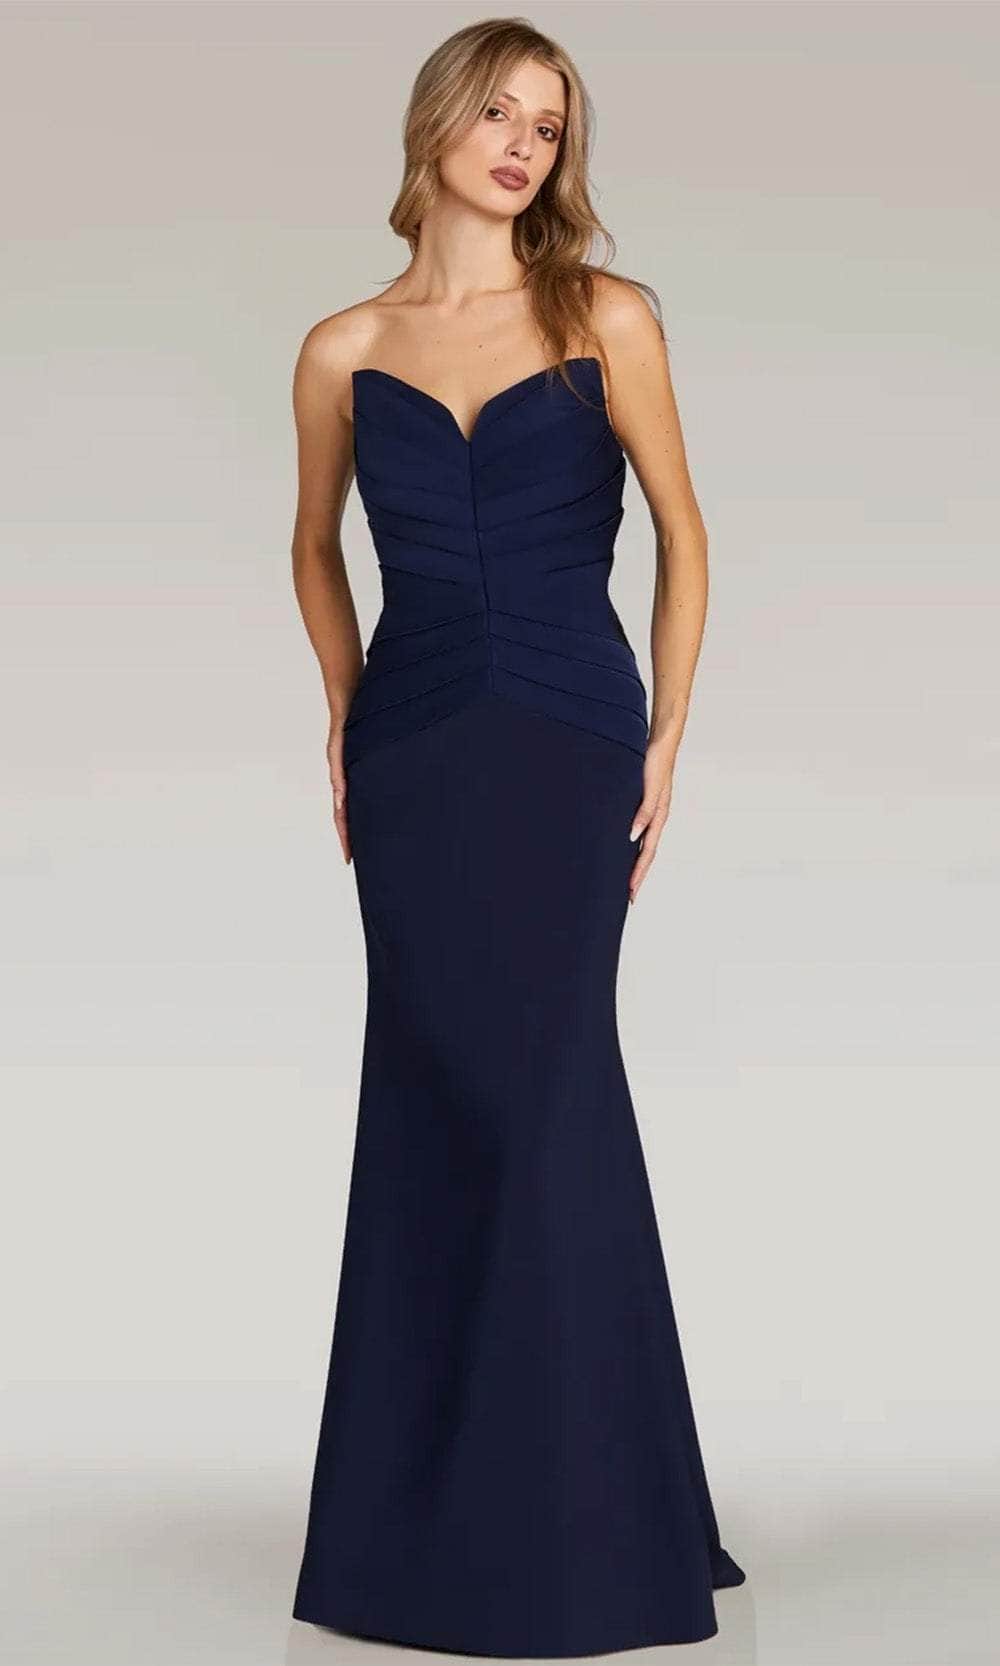 Image of Gia Franco 12312 - Ruched Mermaid Evening Dress